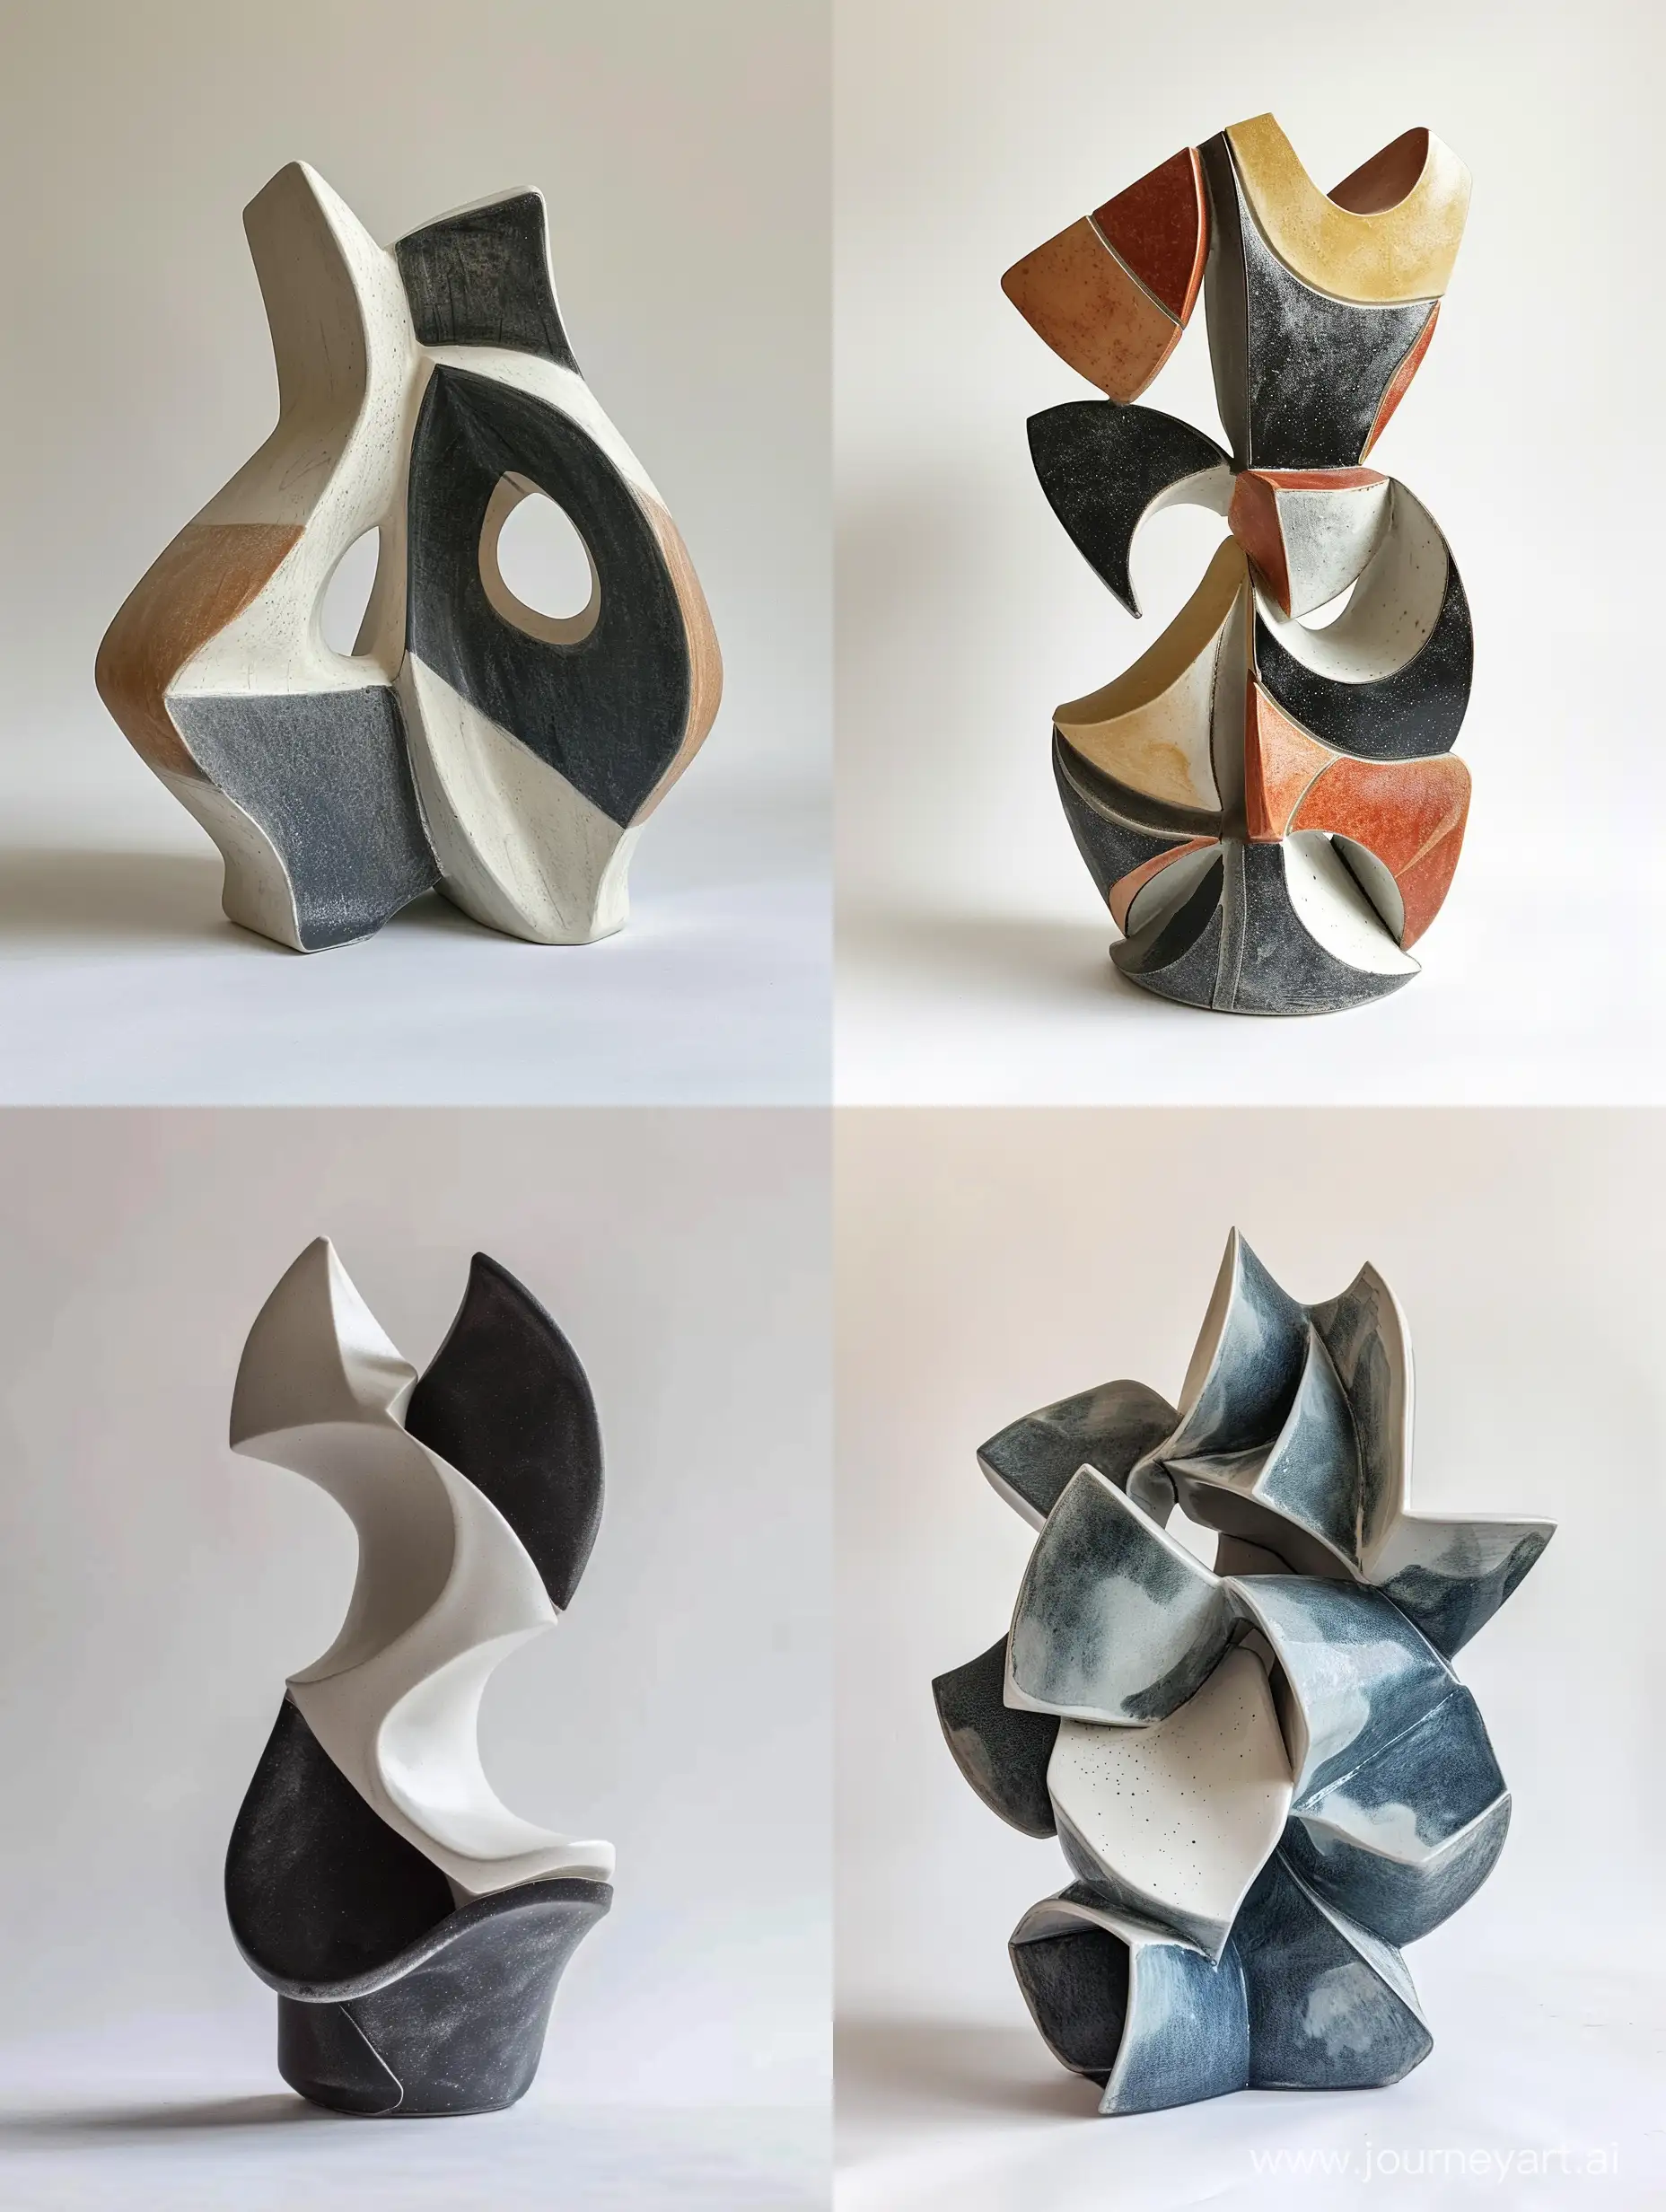 Abstract-Geometric-Ceramic-Sculpture-with-60s-Style-and-Voluminous-Details